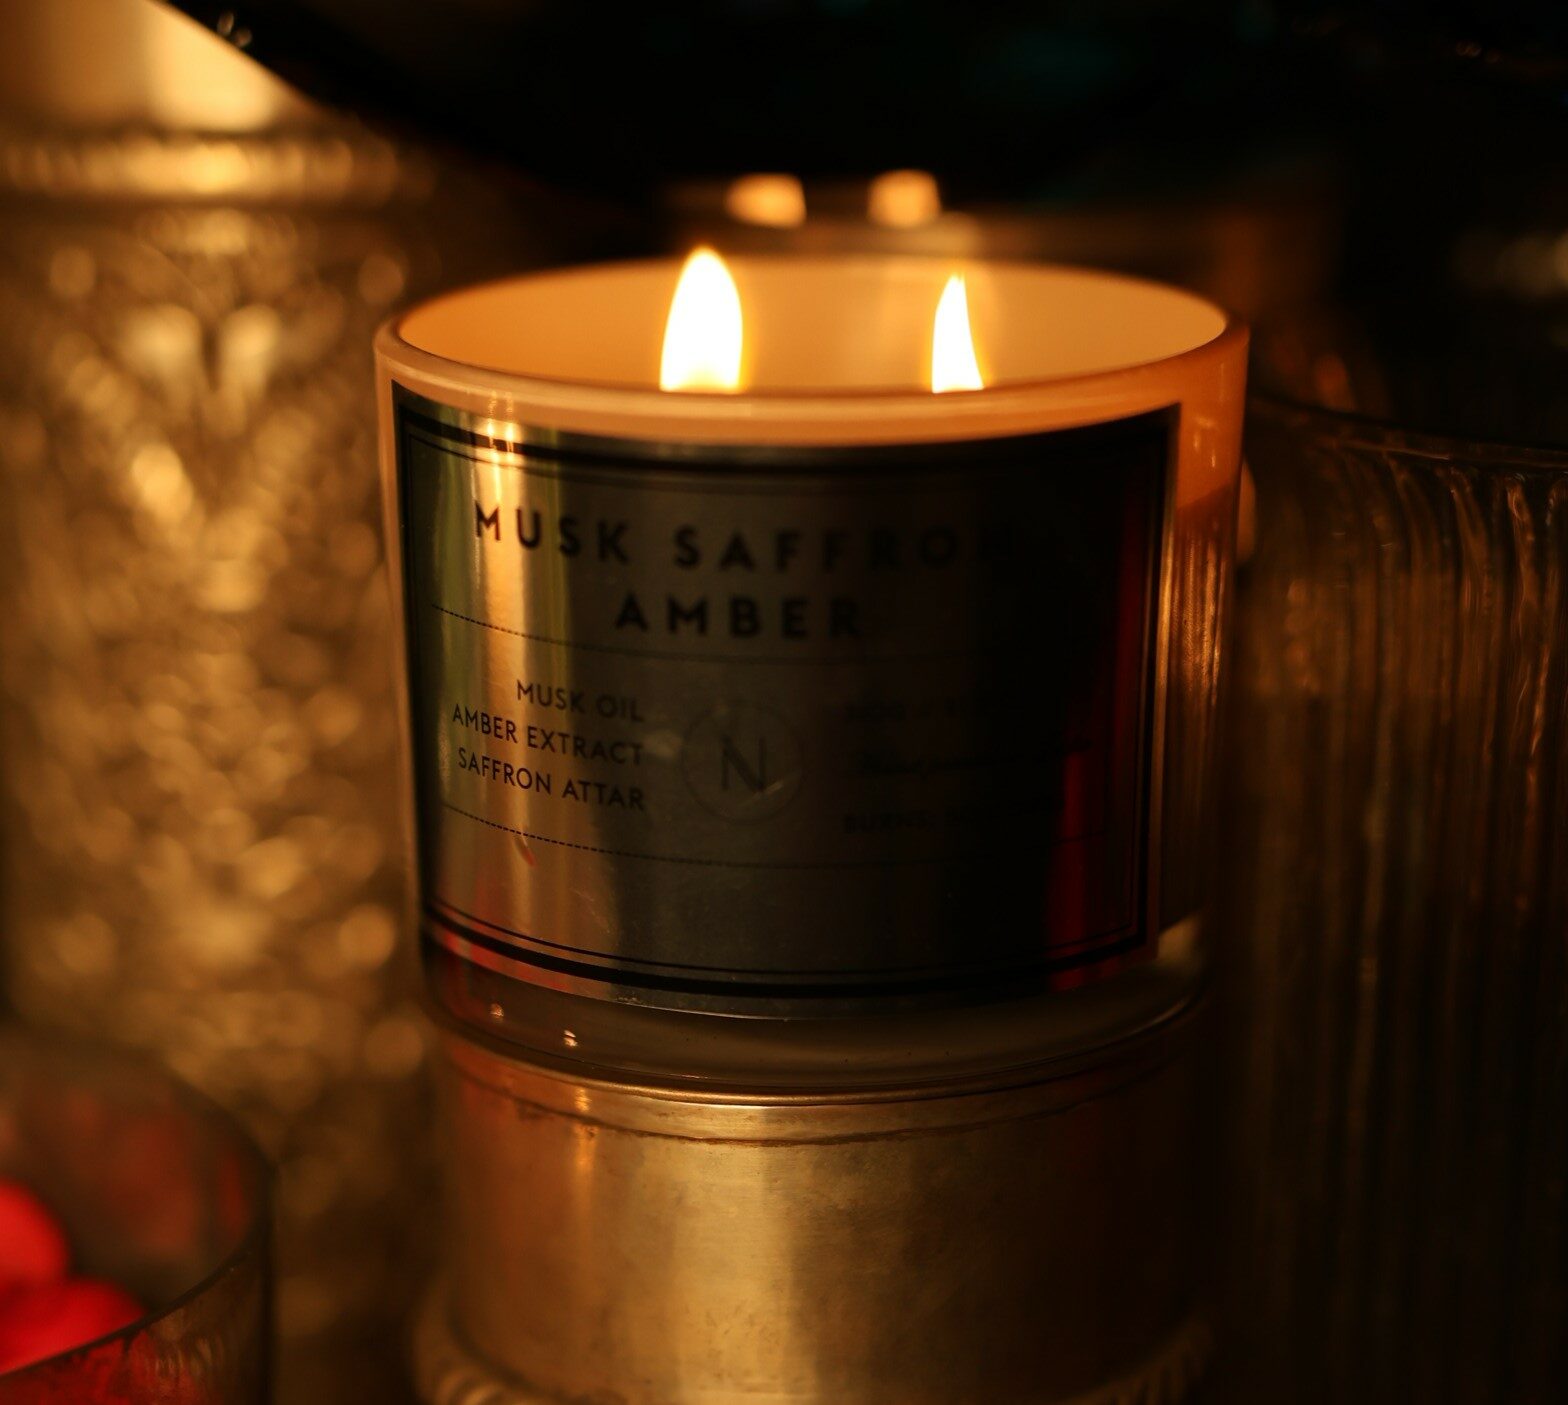 Saffron infused in Musk & Amber | Candle